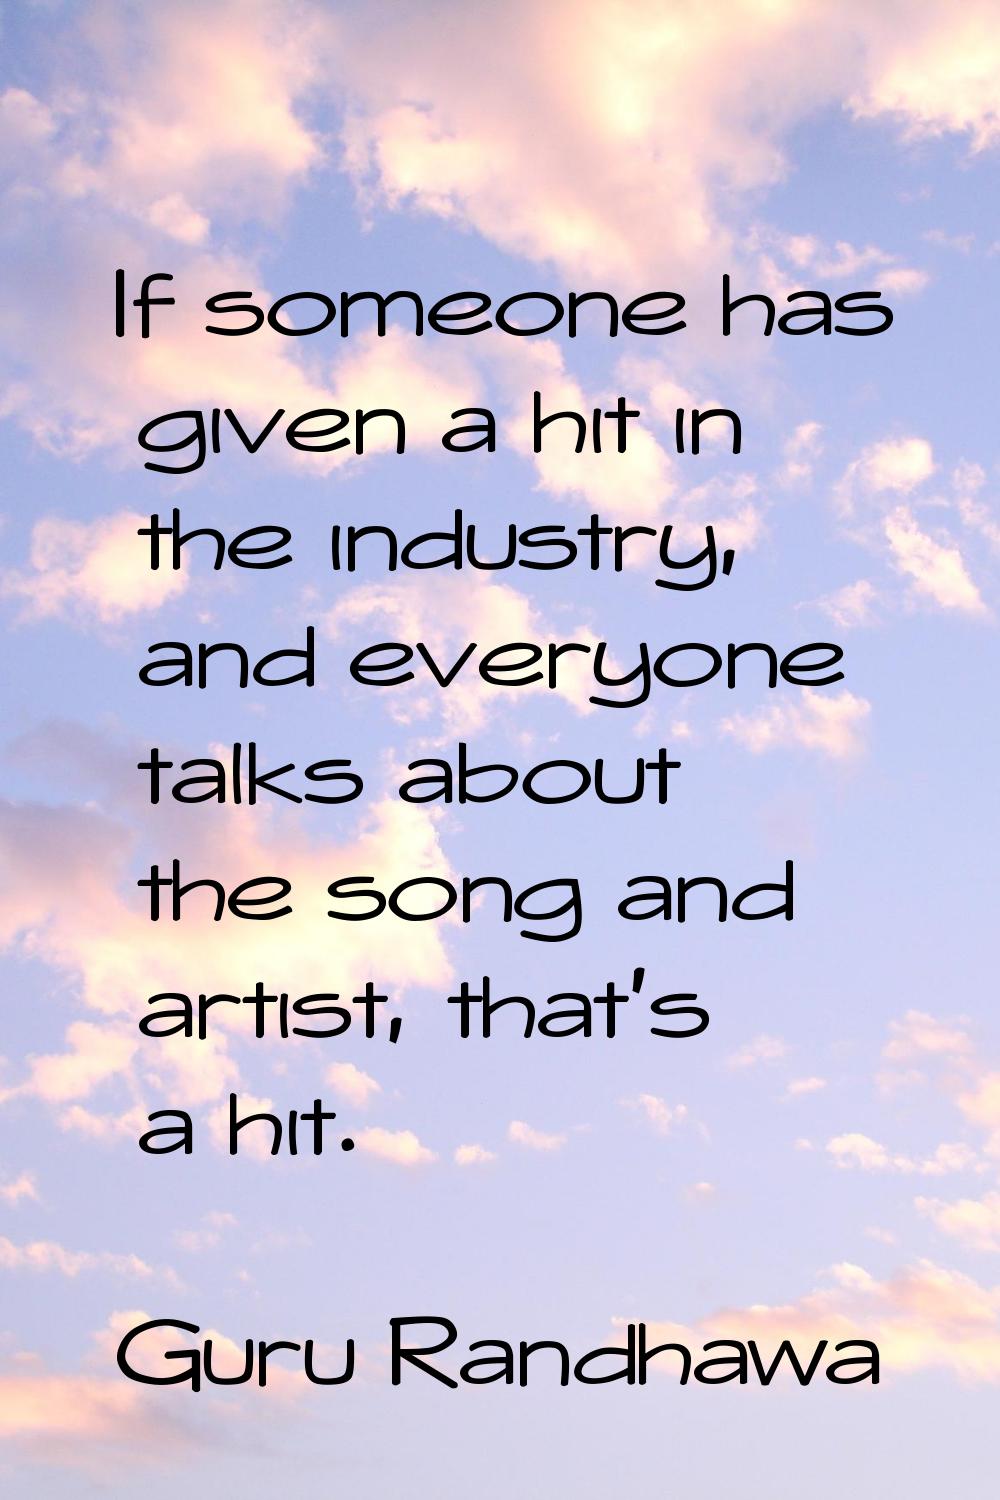 If someone has given a hit in the industry, and everyone talks about the song and artist, that's a 